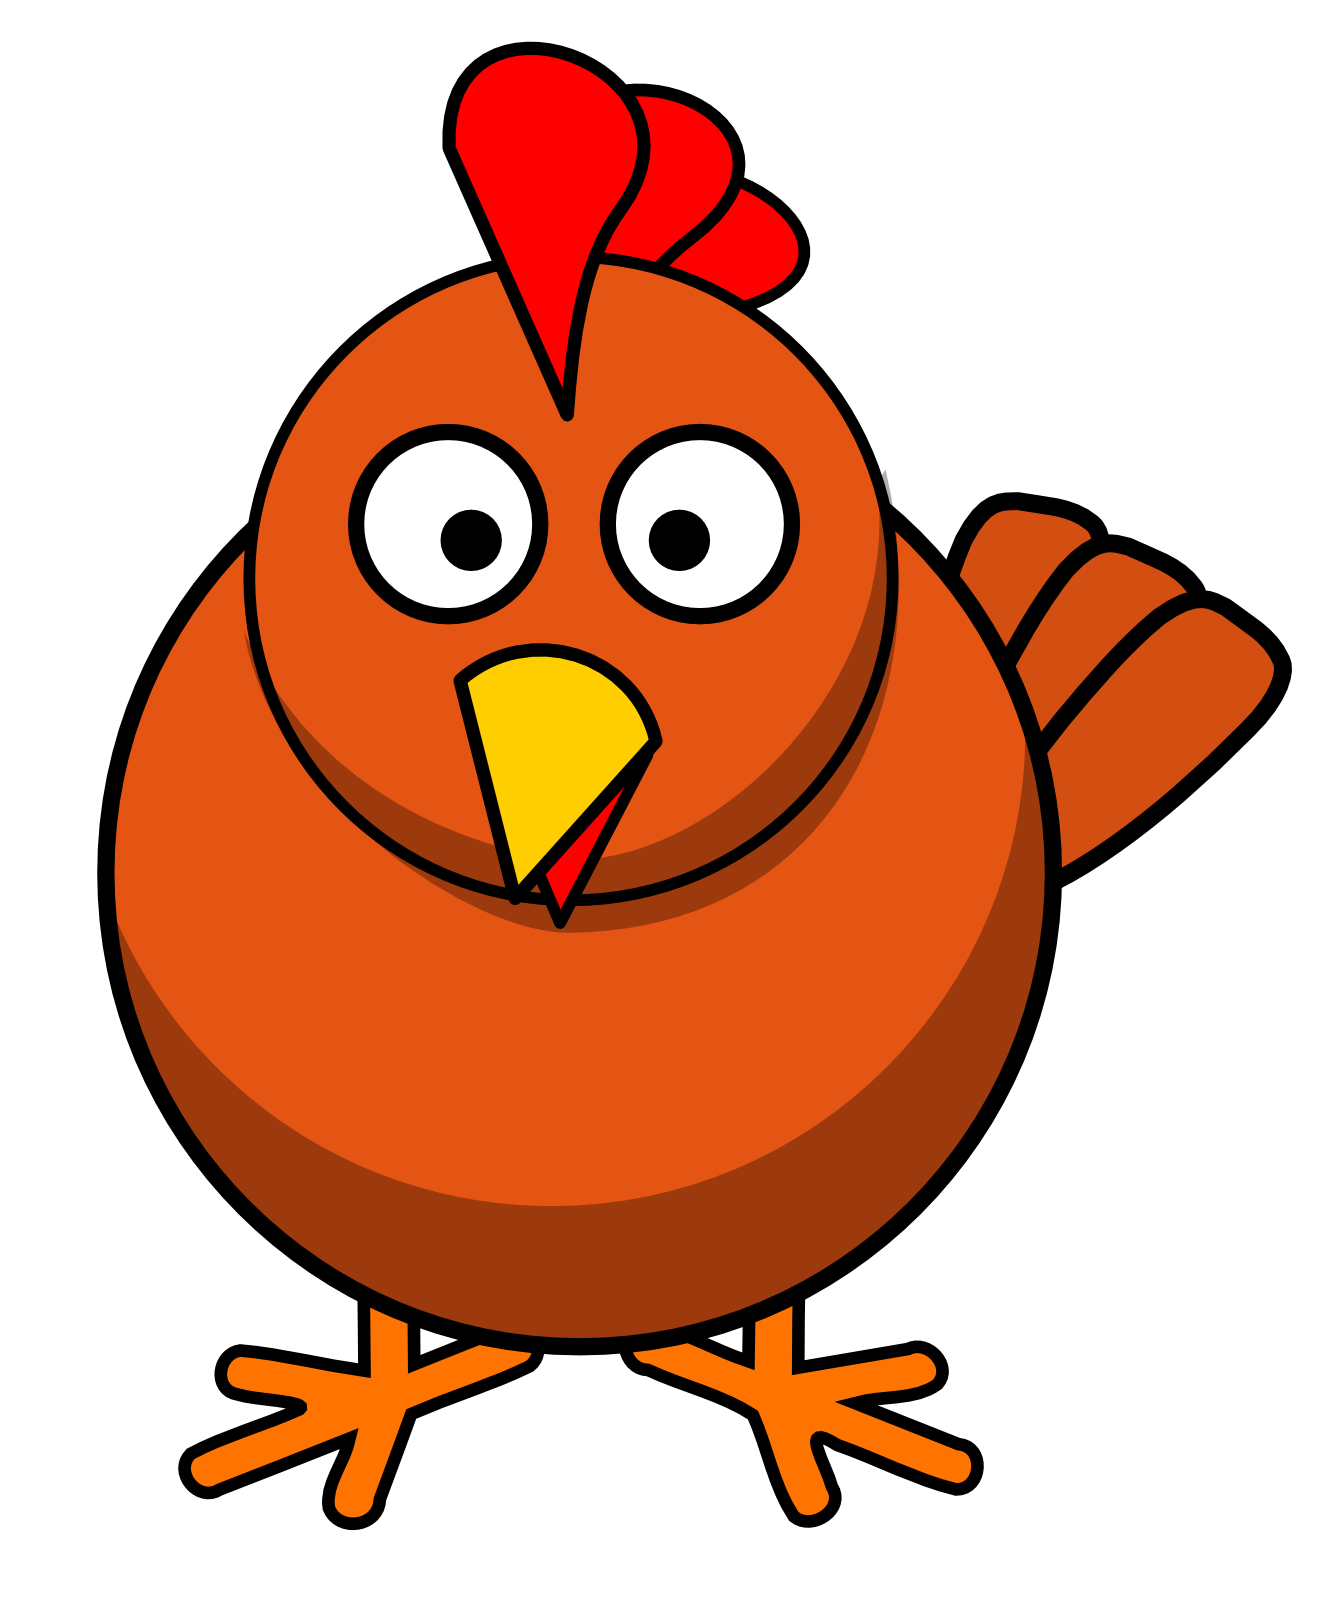 Chicken and egg transparent clipart